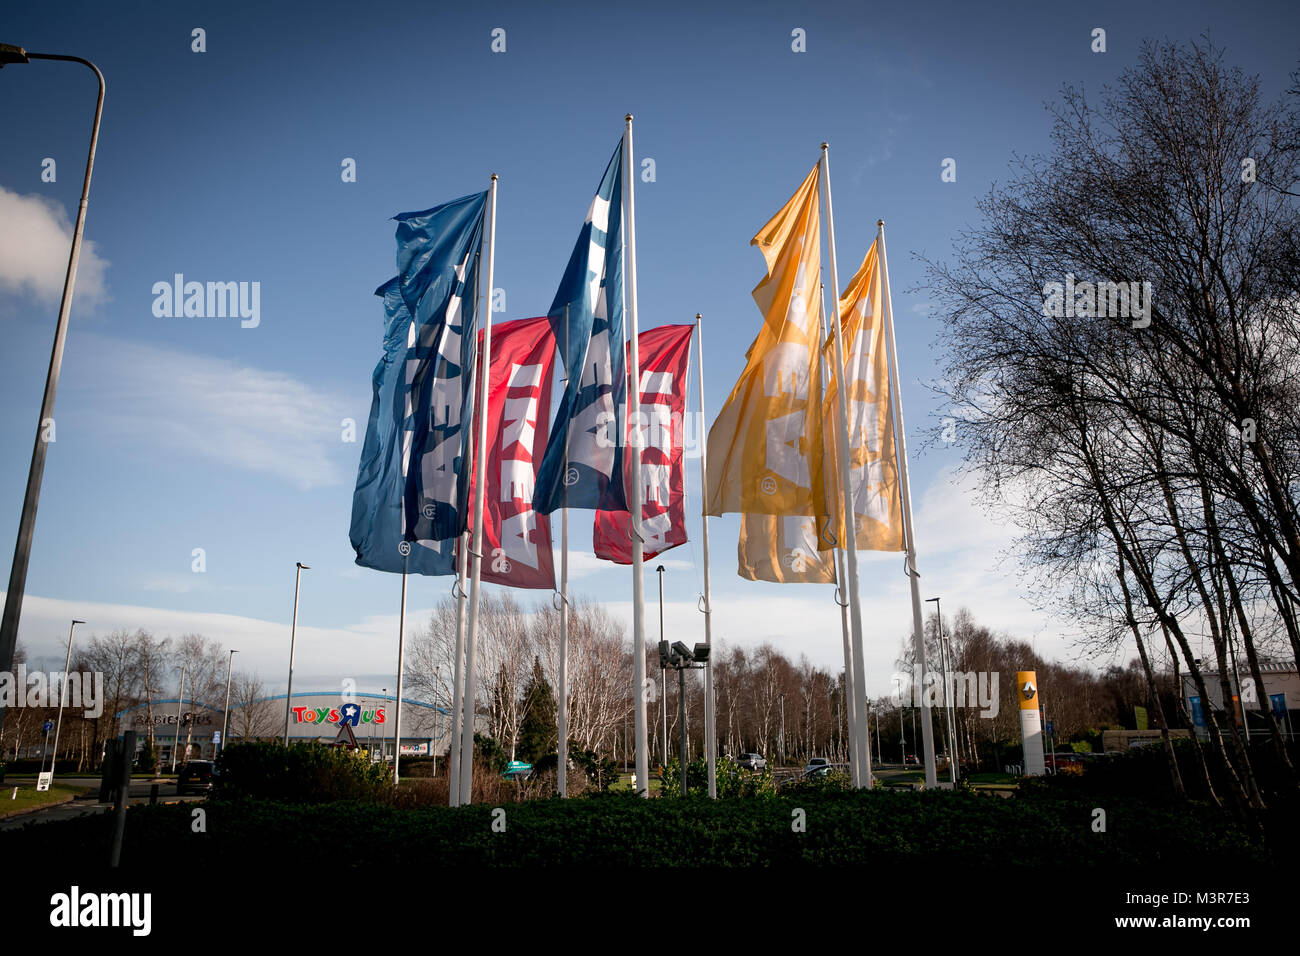 Yellow, blue & red IKEA flags outside store. Warrington, UK. Taken 12th February 2018 after IKEA founder Ingvar Kamprad died aged 91. Stock Photo